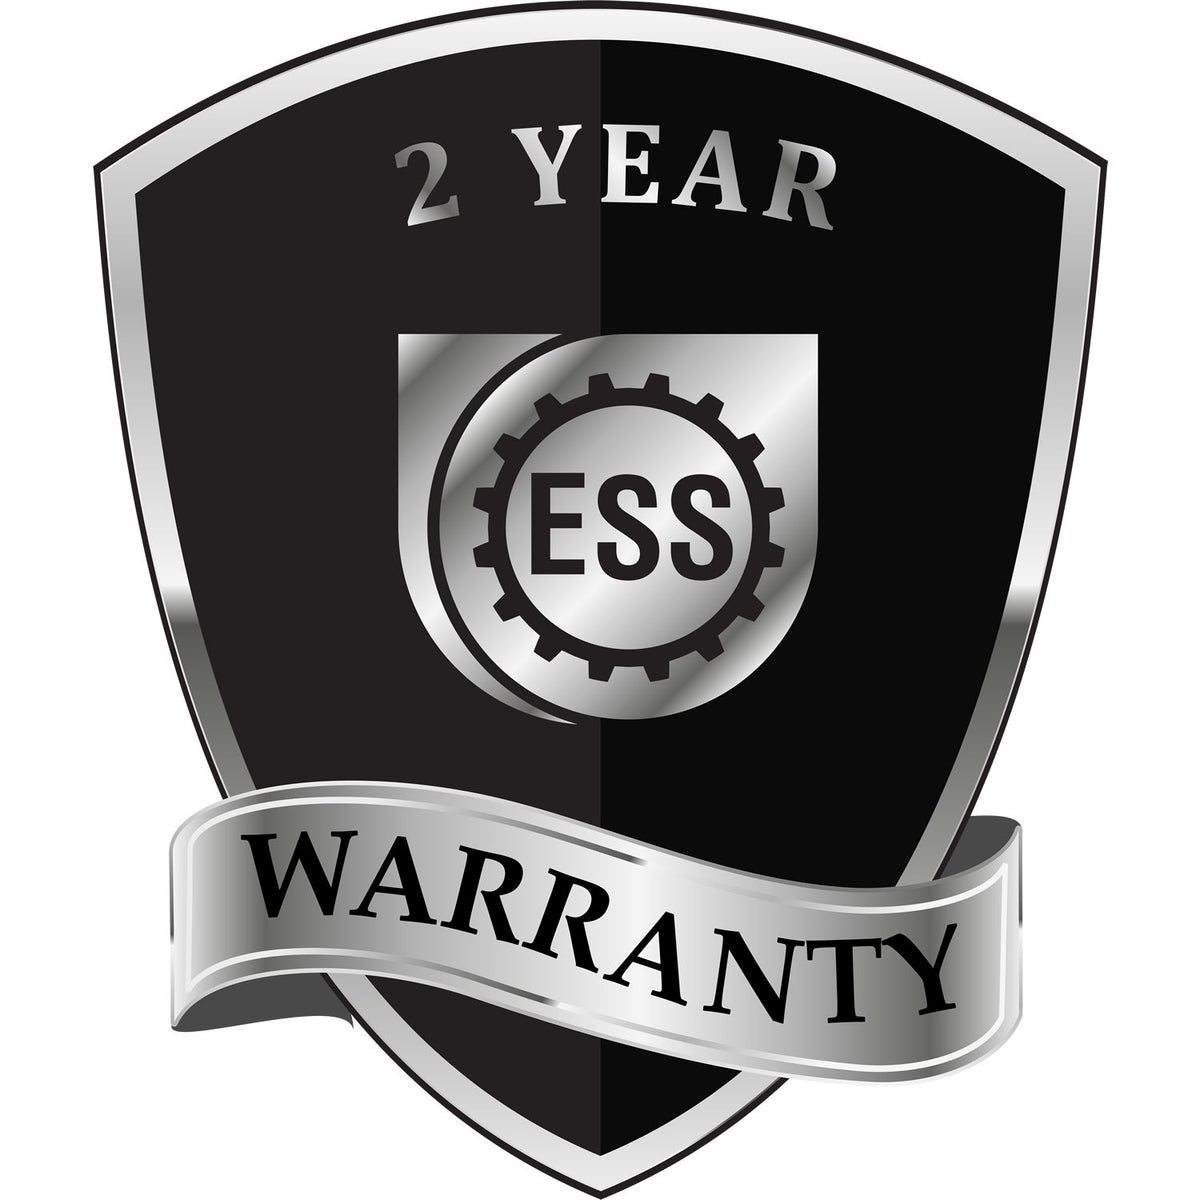 A badge or emblem showing a warranty icon for the Maryland Engineer Desk Seal